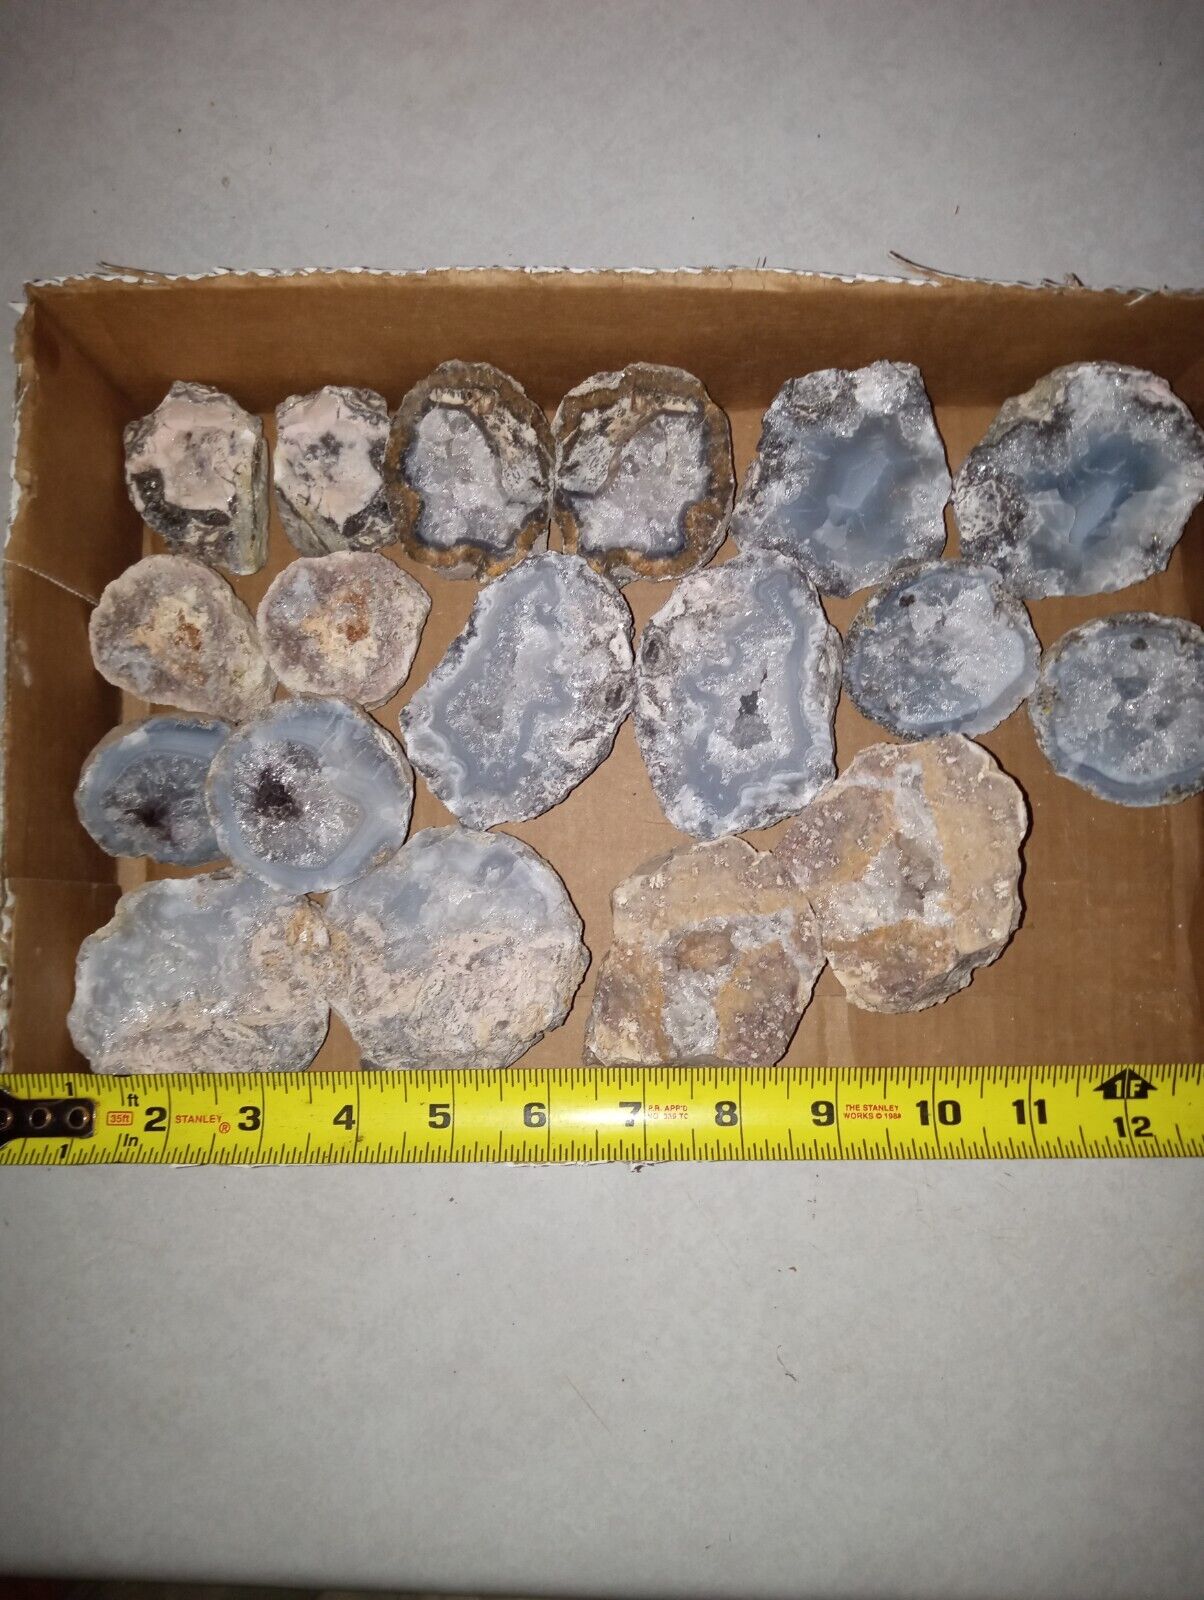 Geodes 8 pounds 8 oz of Choyas, Trancas, Crystal Canyon geodes and agate lot. #1